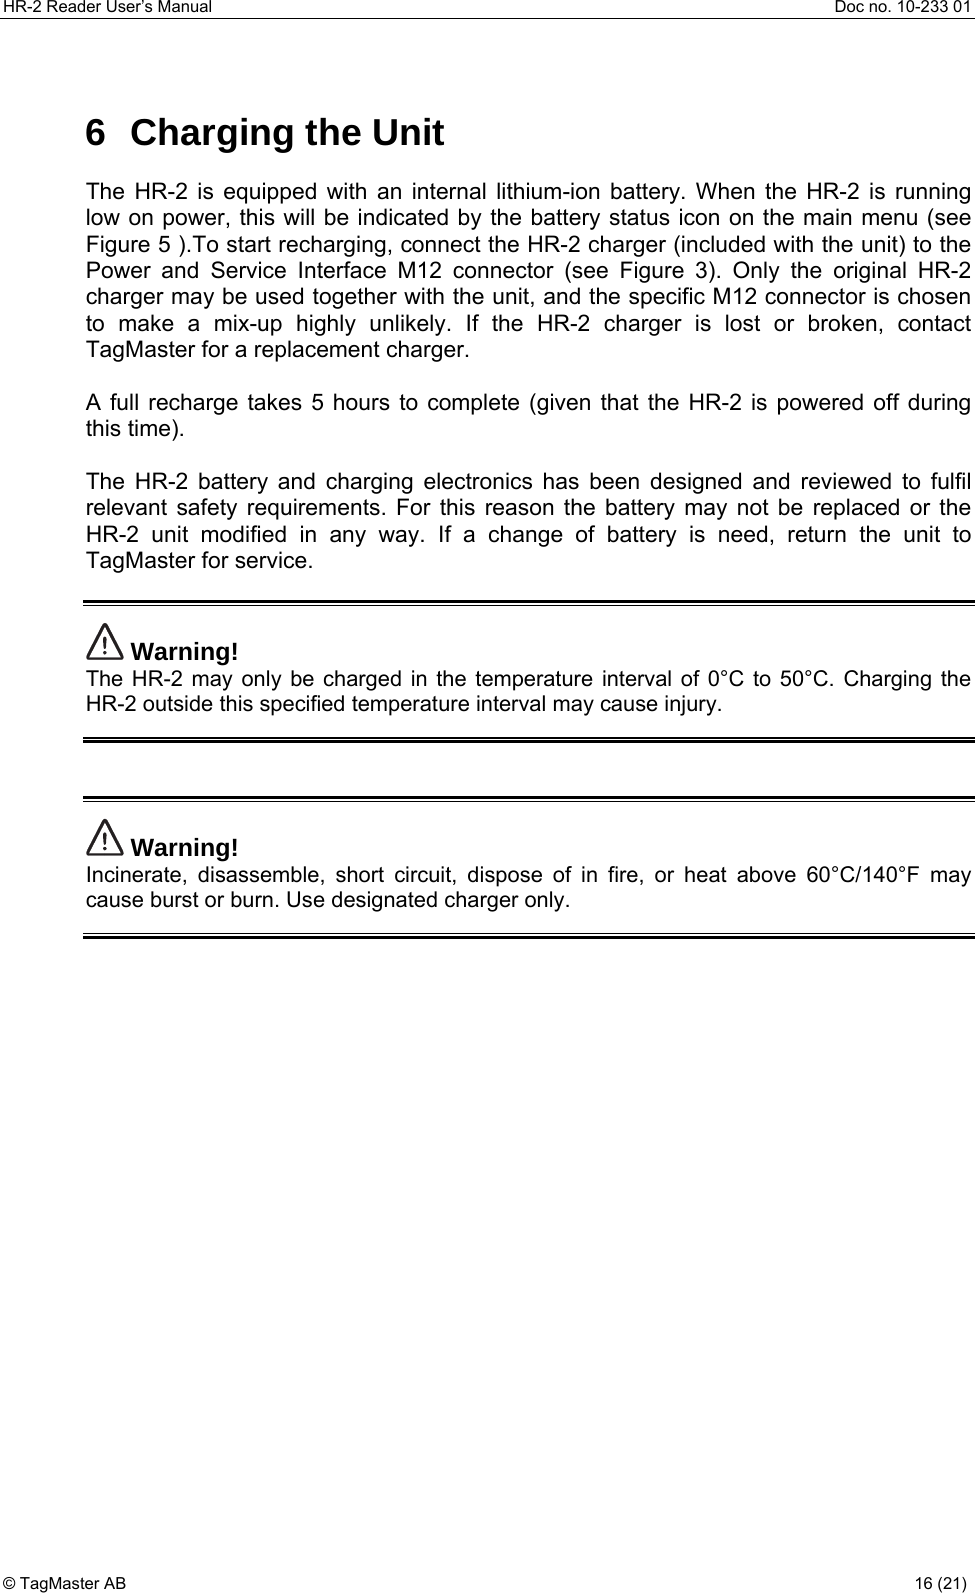 HR-2 Reader User’s Manual  Doc no. 10-233 01 © TagMaster AB  16 (21)   6 Charging the Unit The HR-2 is equipped with an internal lithium-ion battery. When the HR-2 is running low on power, this will be indicated by the battery status icon on the main menu (see Figure 5 ).To start recharging, connect the HR-2 charger (included with the unit) to the Power and Service Interface M12 connector (see Figure 3). Only the original HR-2 charger may be used together with the unit, and the specific M12 connector is chosen to make a mix-up highly unlikely. If the HR-2 charger is lost or broken, contact TagMaster for a replacement charger.  A full recharge takes 5 hours to complete (given that the HR-2 is powered off during this time).  The HR-2 battery and charging electronics has been designed and reviewed to fulfil relevant safety requirements. For this reason the battery may not be replaced or the HR-2 unit modified in any way. If a change of battery is need, return the unit to TagMaster for service.   Warning! The HR-2 may only be charged in the temperature interval of 0°C to 50°C. Charging the HR-2 outside this specified temperature interval may cause injury.     Warning! Incinerate, disassemble, short circuit, dispose of in fire, or heat above 60°C/140°F may cause burst or burn. Use designated charger only.        